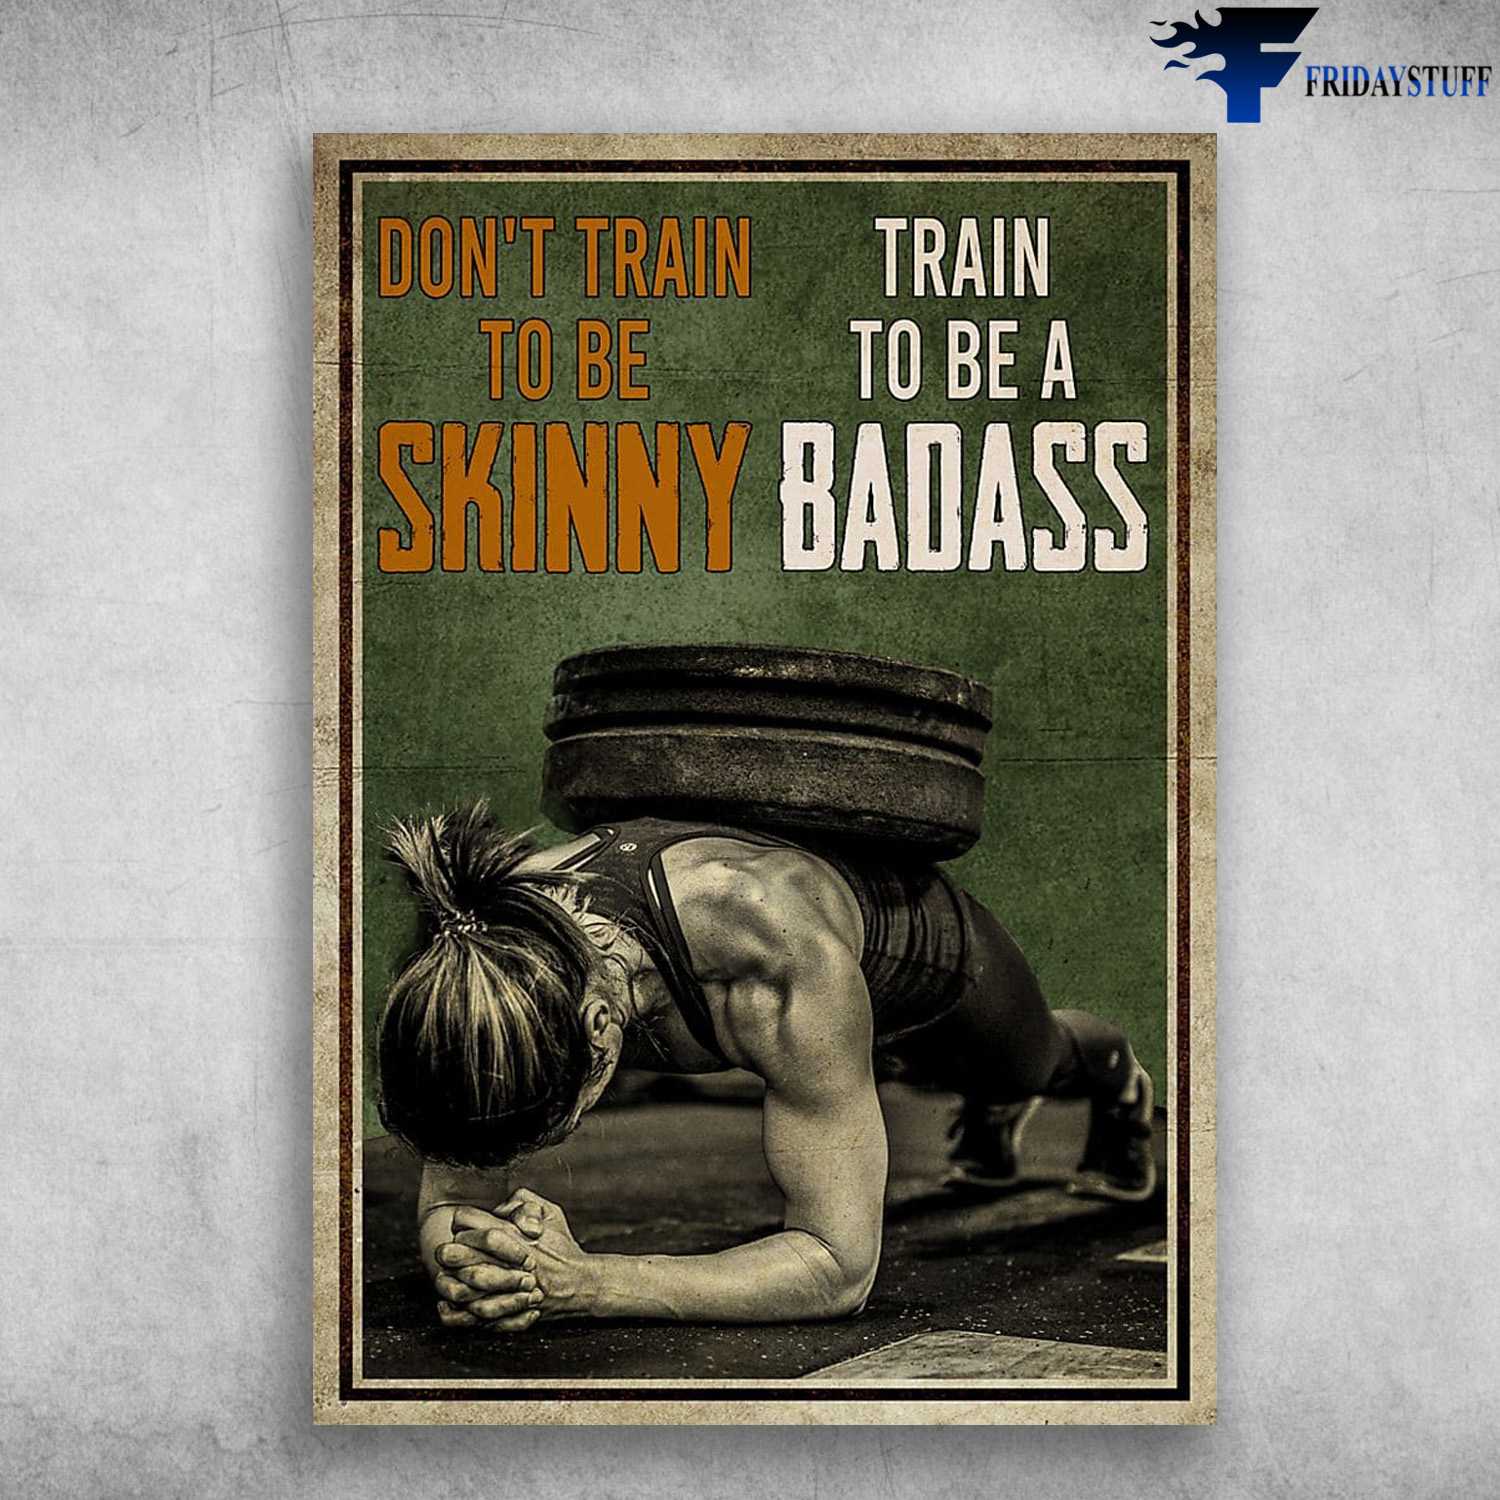 Gym Girl, Gym Room Poster, Don't Train To Be Skinny, Train To Be A Badass